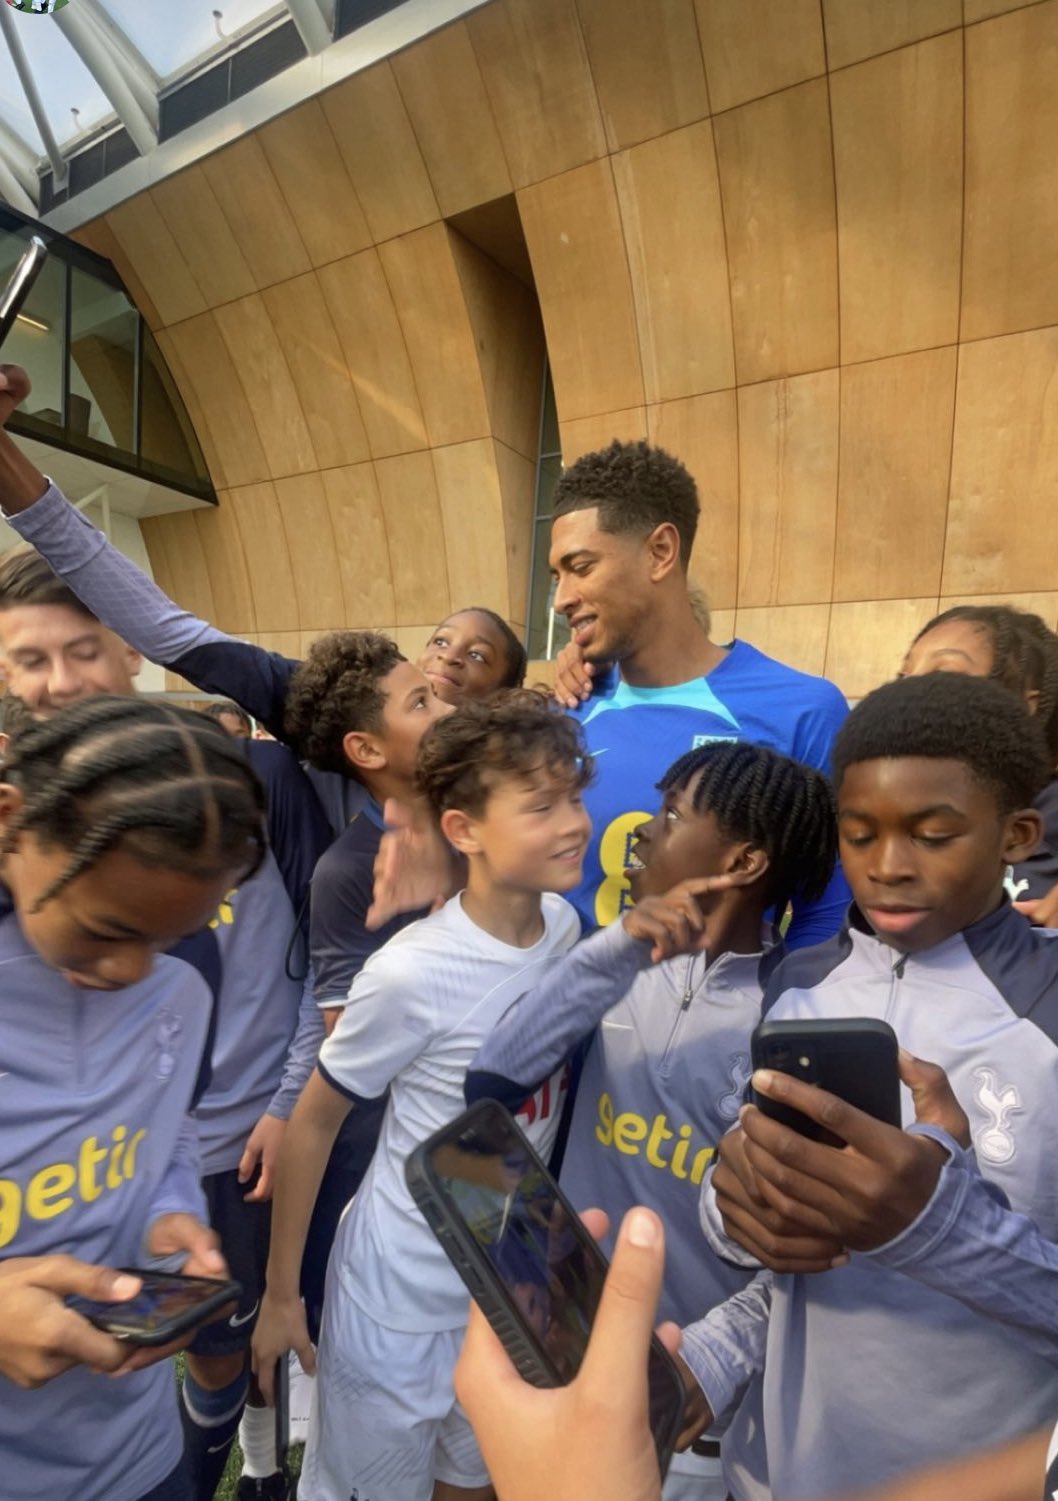 thfcreport Academy on X: "Some of the #thfc academy players were happy to see Jude Bellingham today. https://t.co/Nfbgi6Hm8V" / X